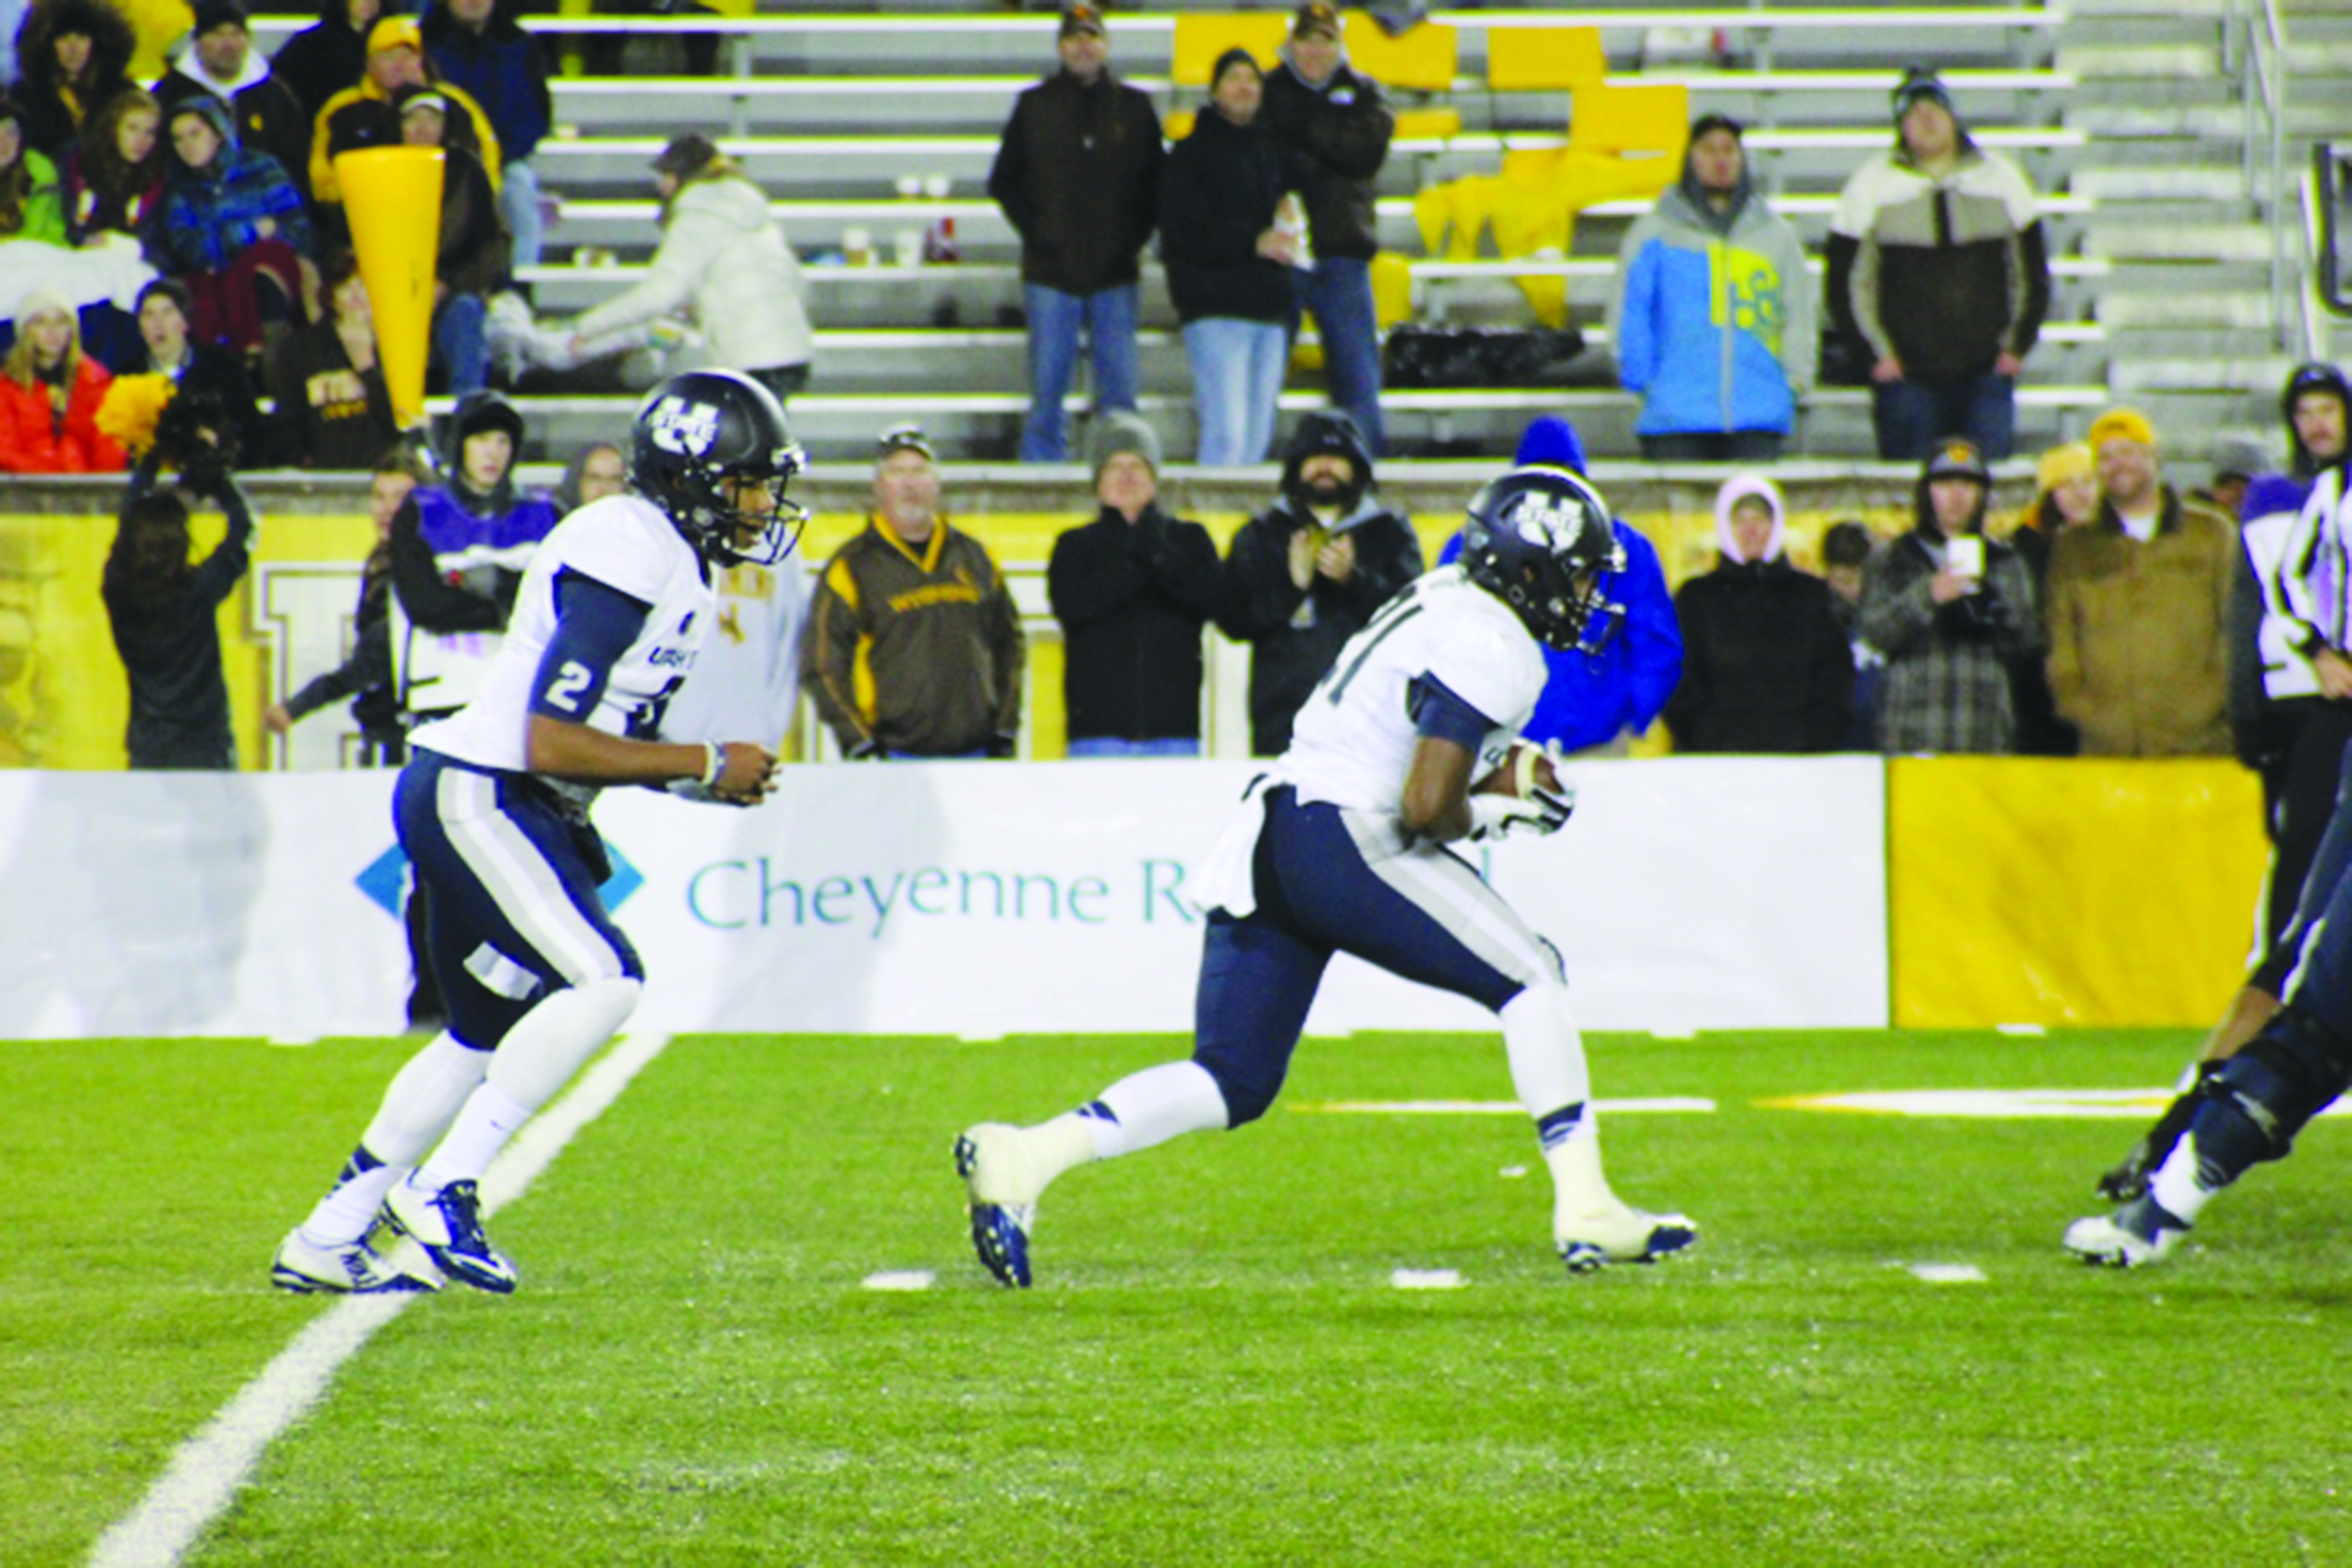 USU readies for New Mexico through injuries